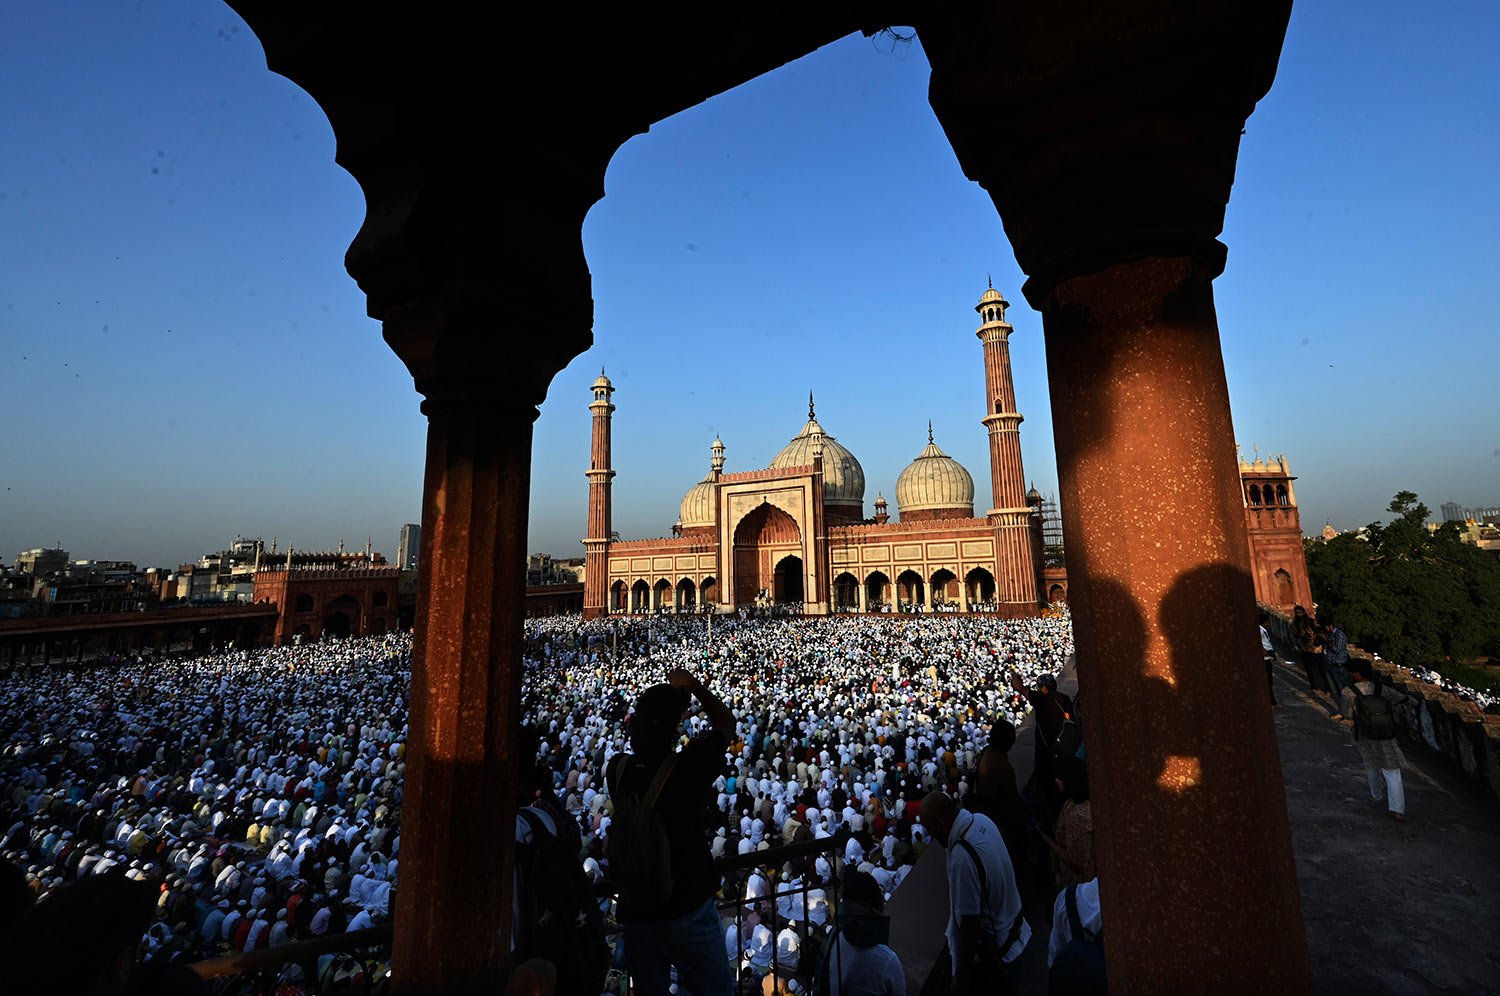  Muslims gather to offer Eid al-Fitr prayer marking the end of the holy fasting month of Ramadan at the Jama Masjid, in New Delhi, India, Saturday, April 22, 2023. (AP Photo/Deepanshu Aggarwal) 